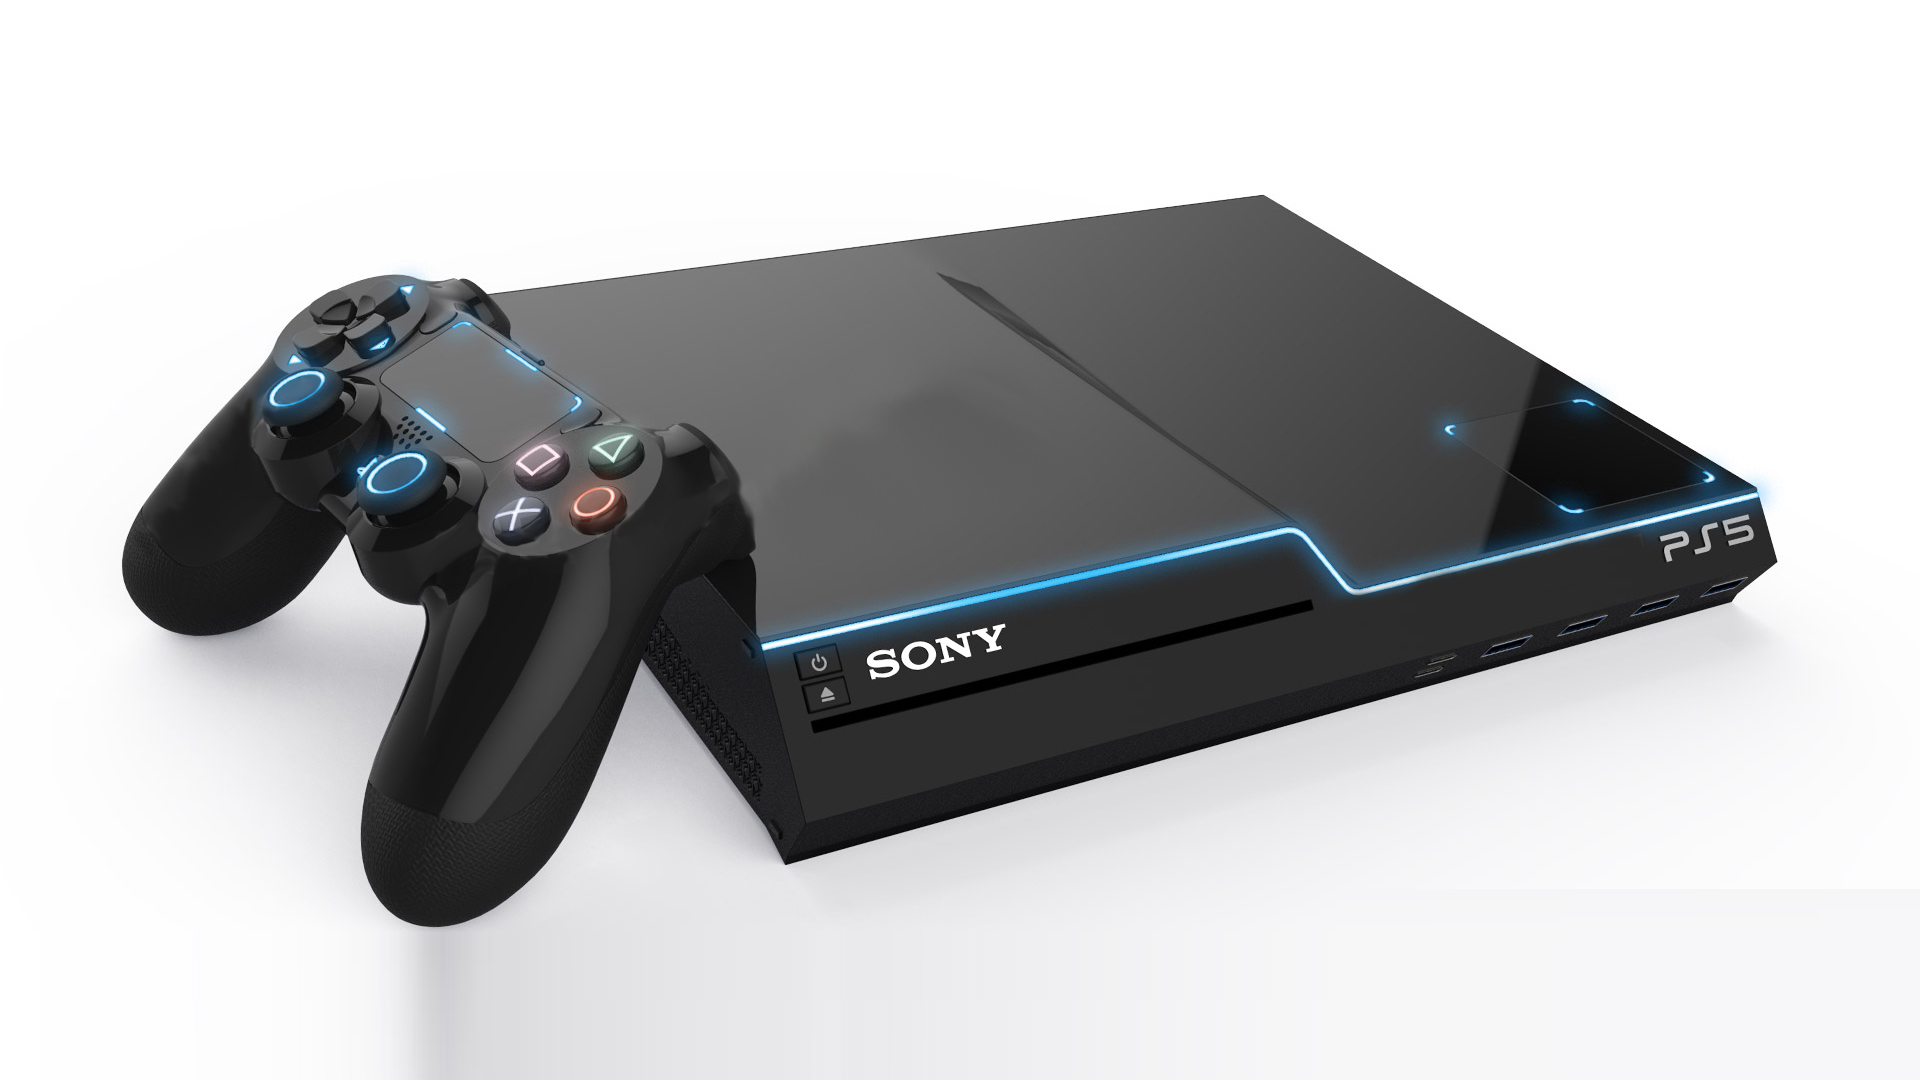 stress fax Rejsende Michael Pachter Predicts PS5 Will Cost $800